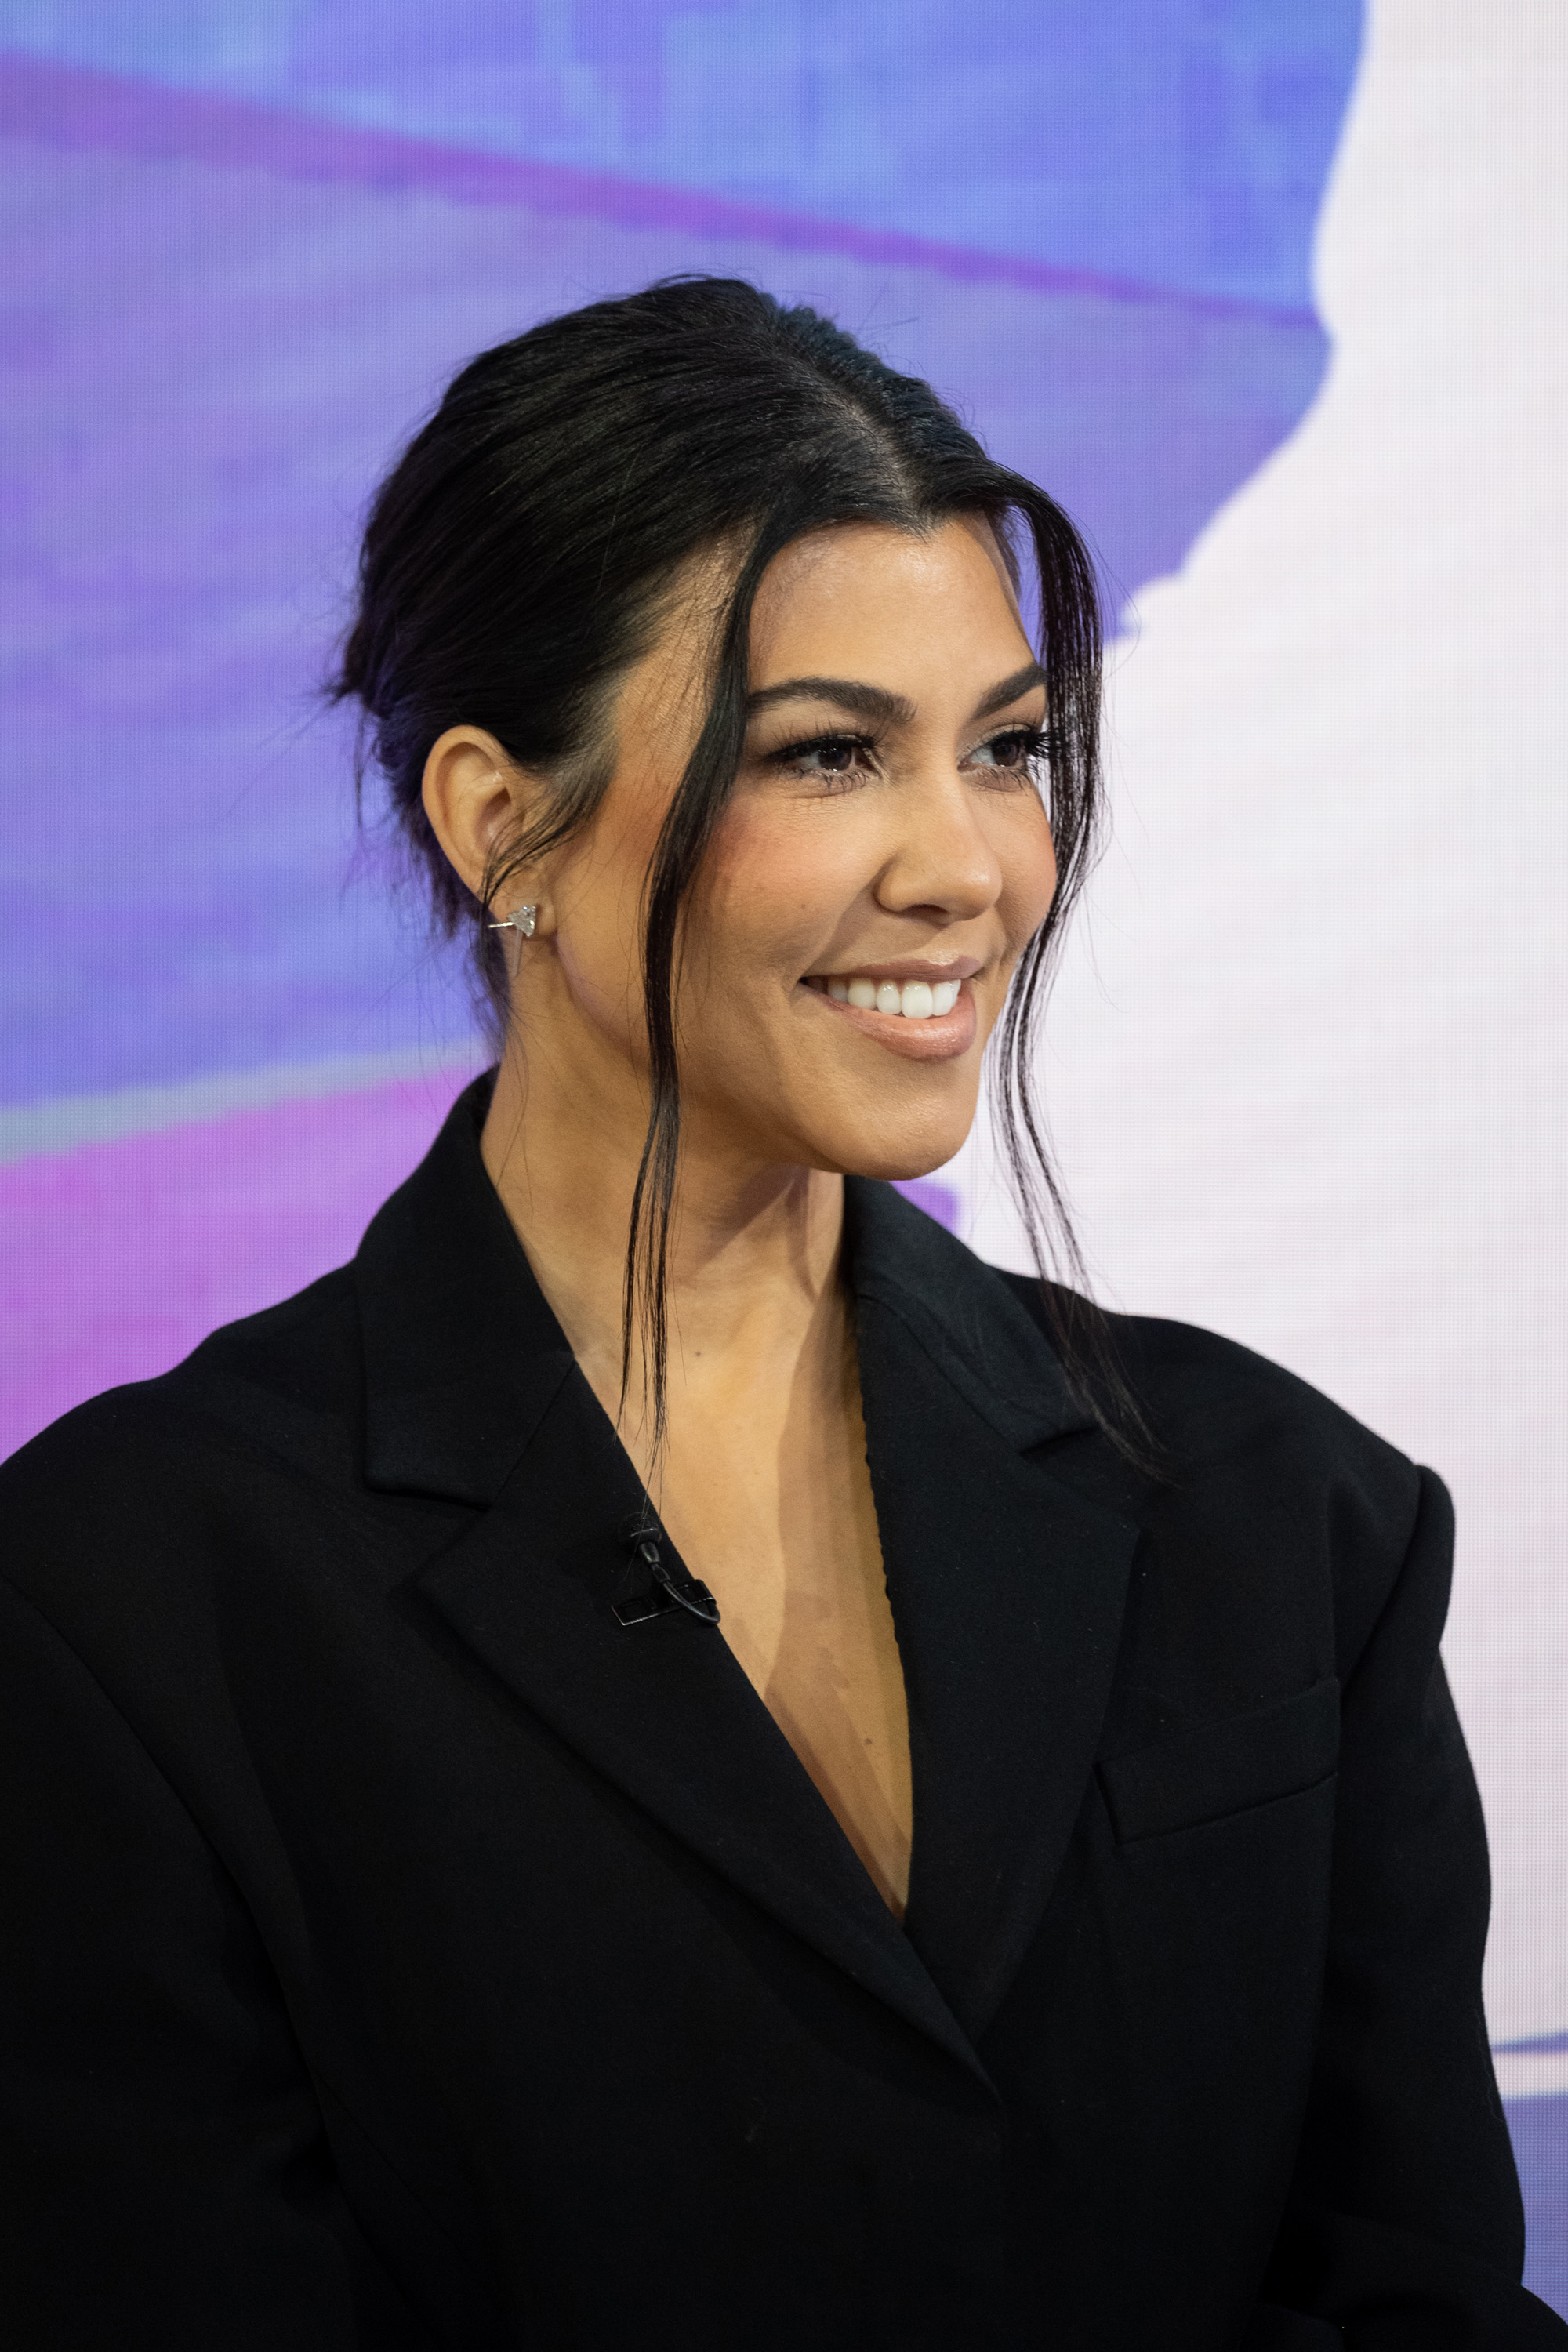 Close-up of Kourtney smiling at a media event